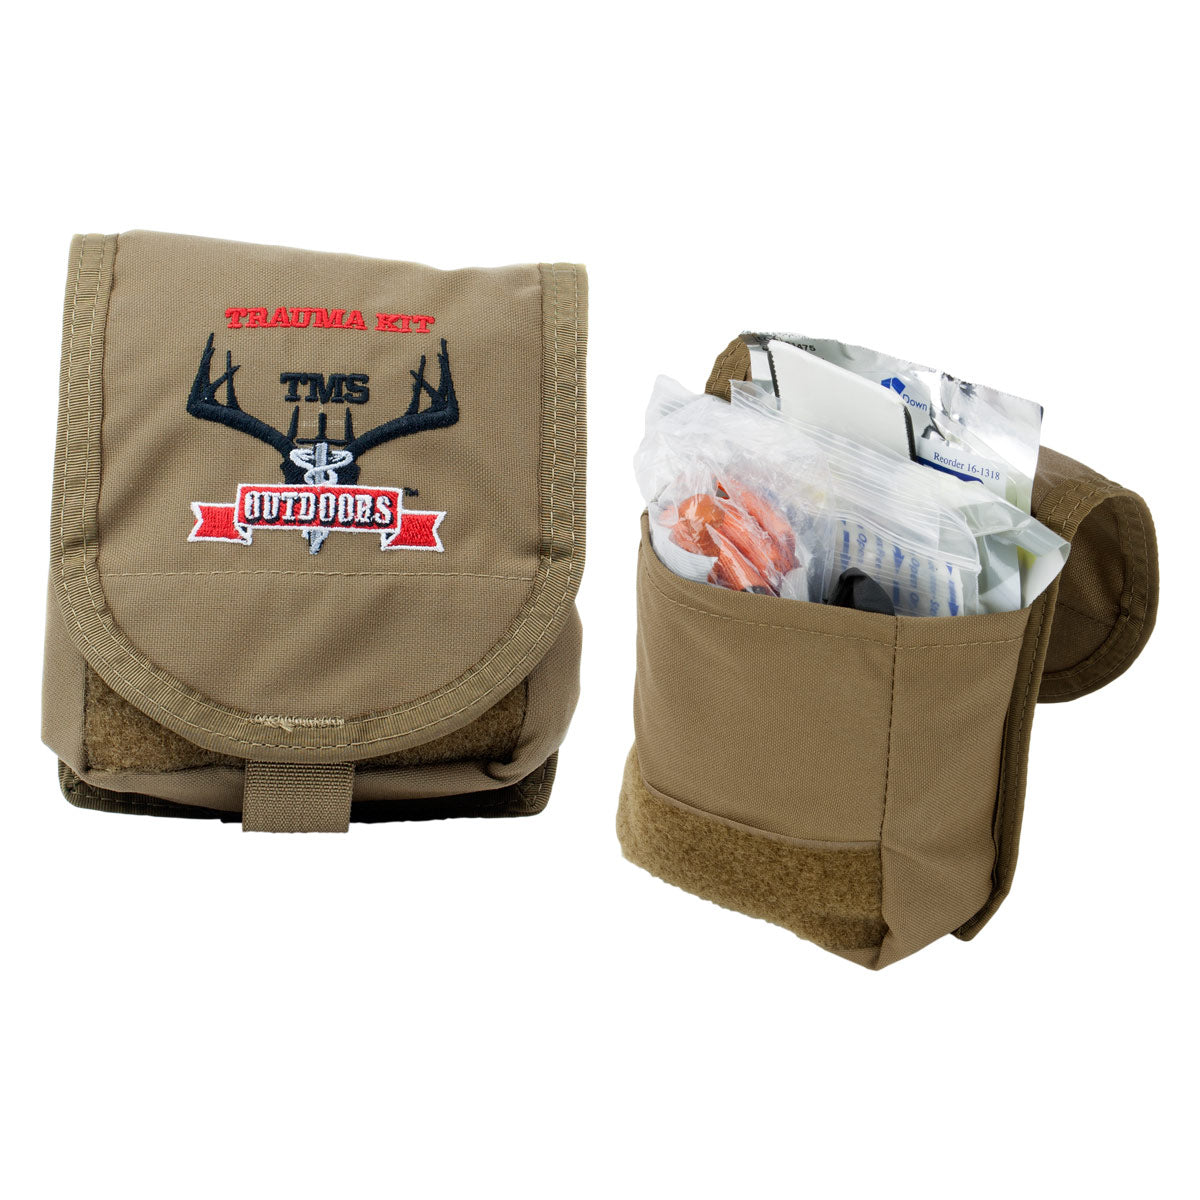 Outdoor Trauma Kit - Small Version - Tan Pouch